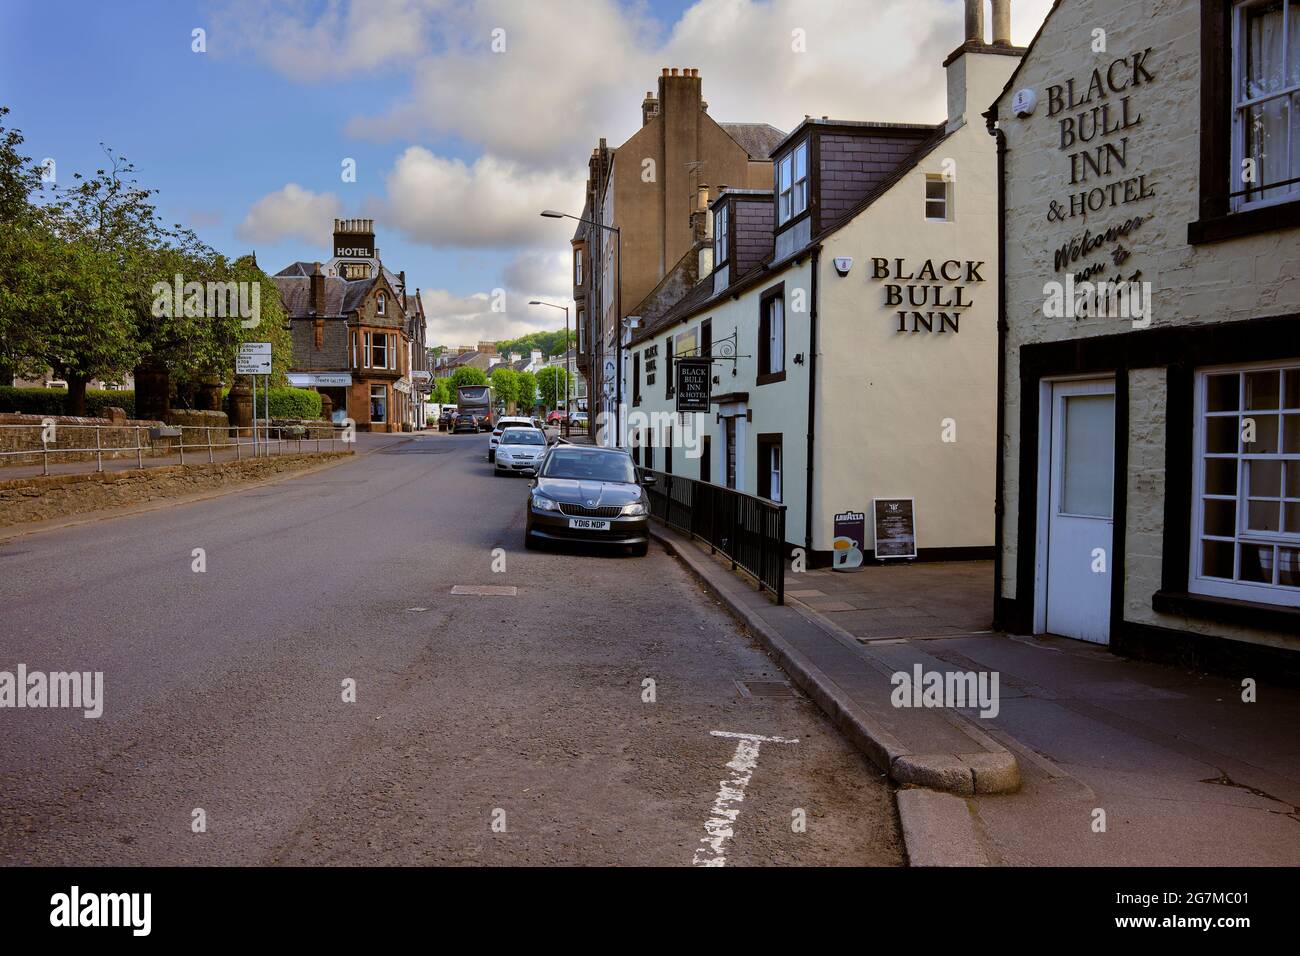 The Black Bull Inn & Hotel on Church Gate in Moffat. Looking towards the town centre Stock Photo